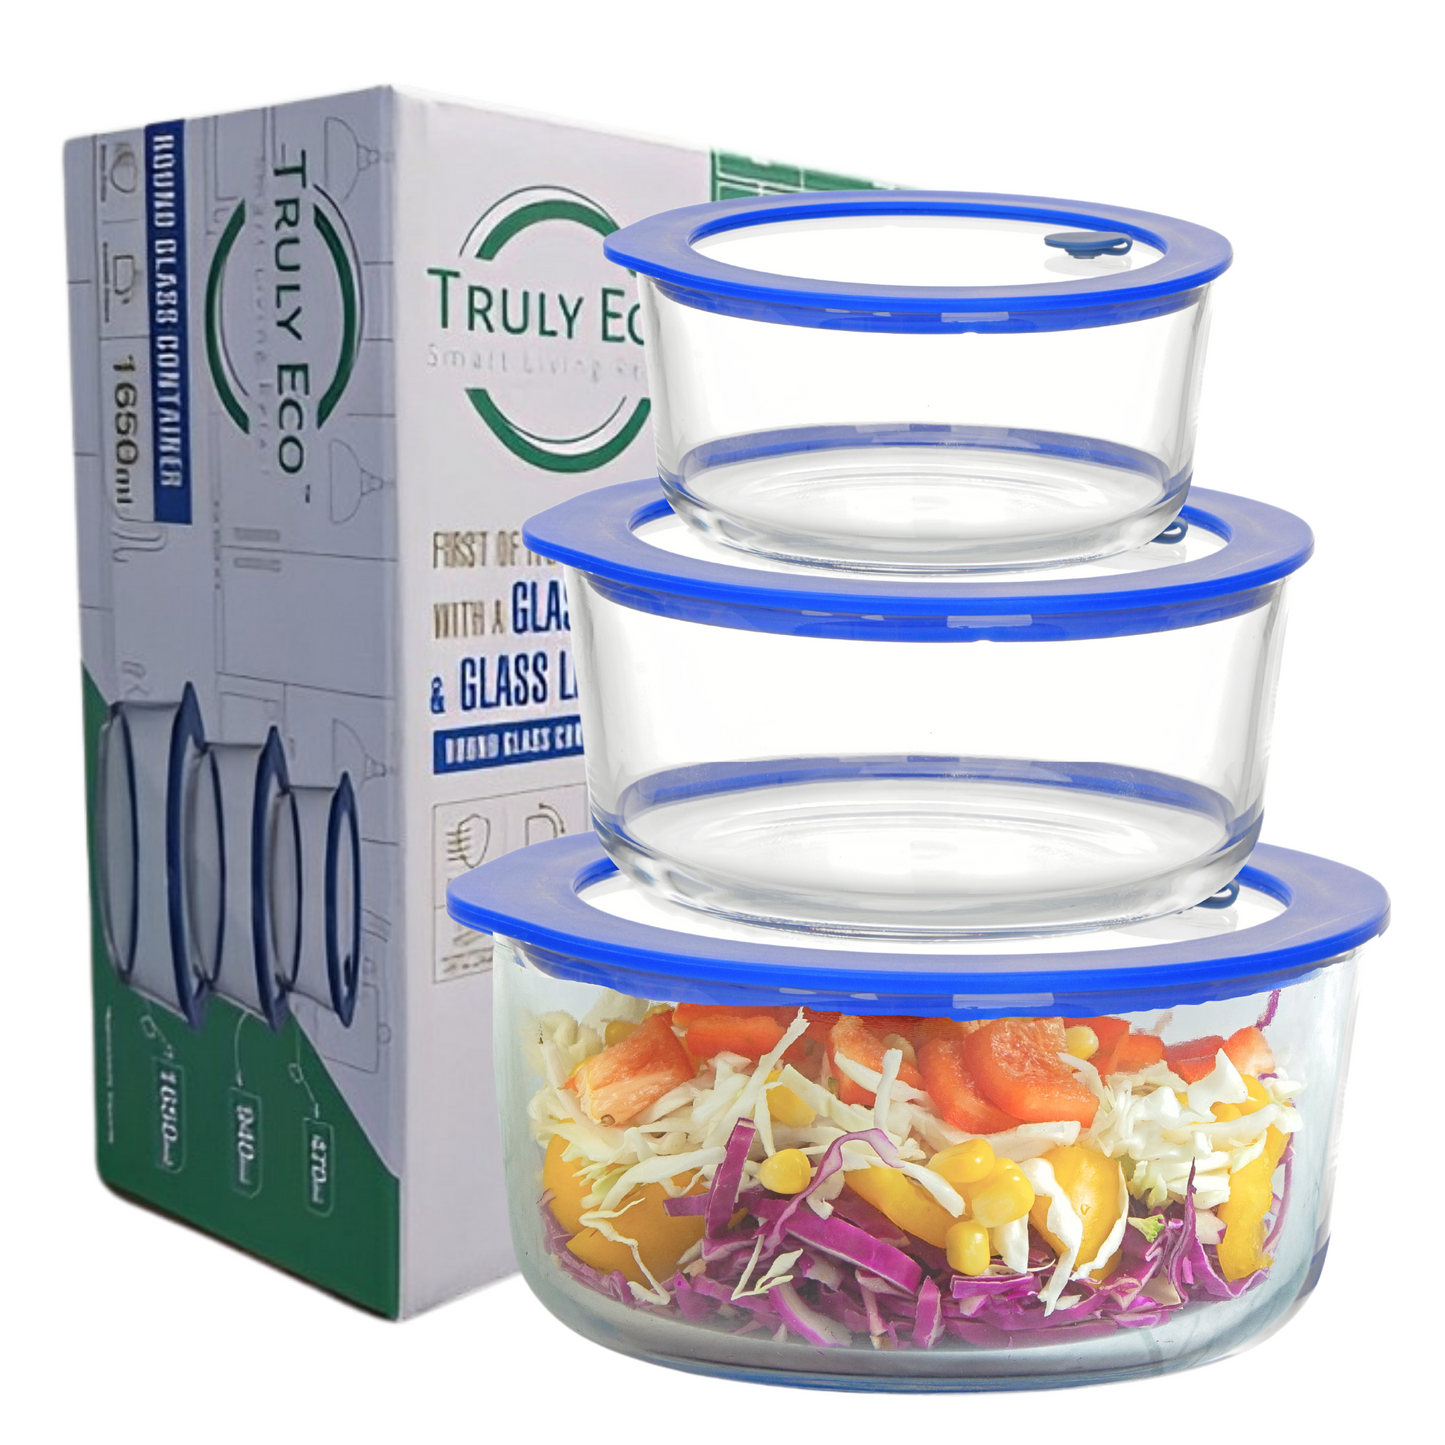 Truly Eco Round Premium Borosilicate Glass Containers Combo Set - 472ml, 944ml and 1652ml